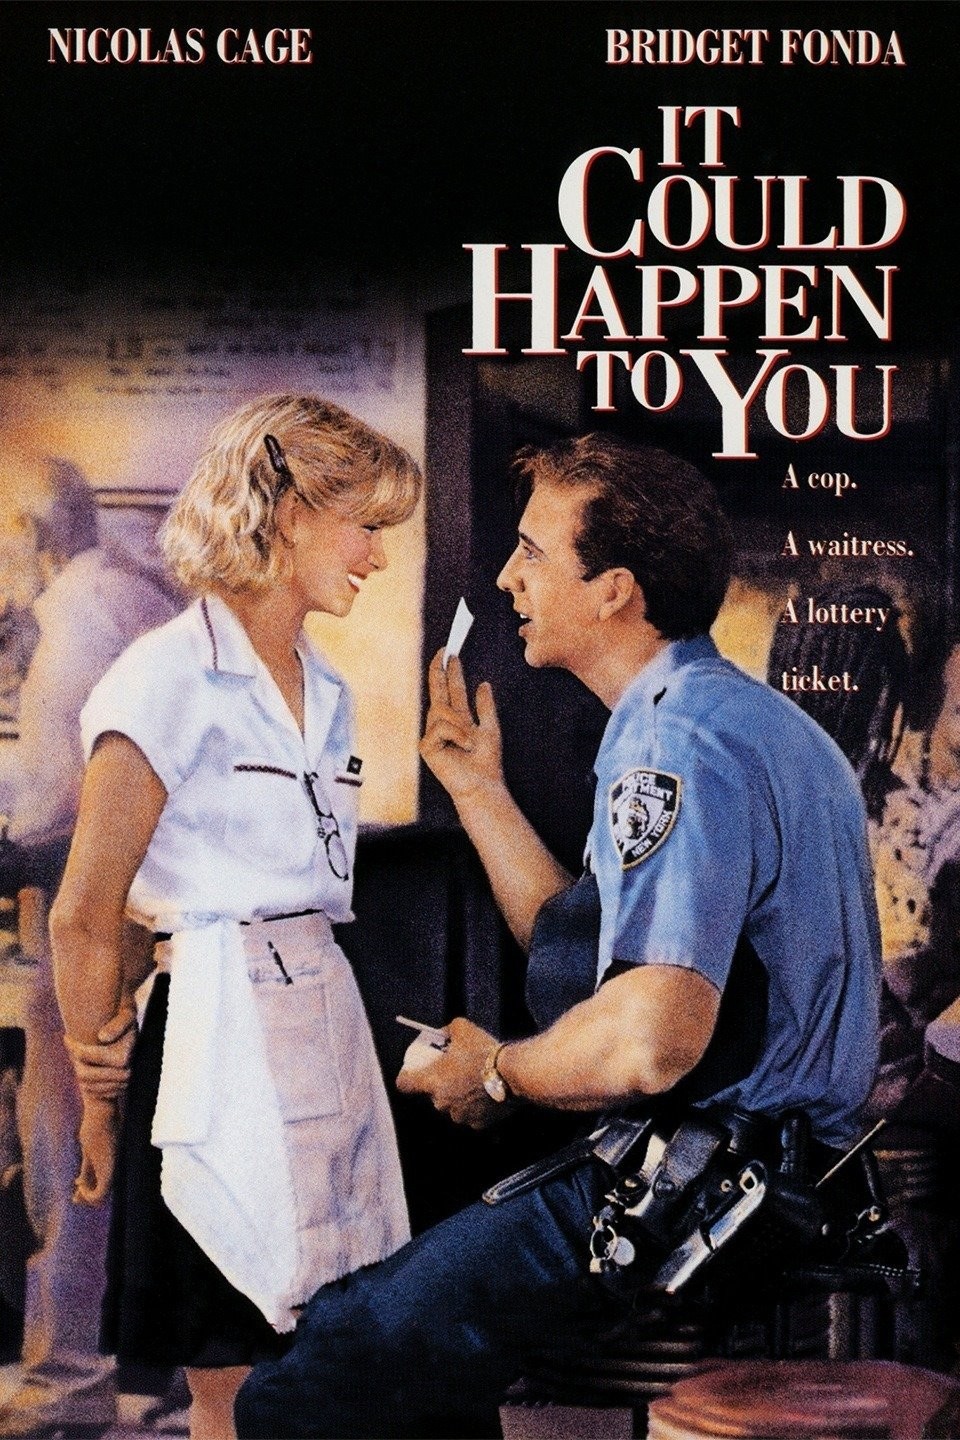 It Could Happen to You (1994) - Filmaffinity